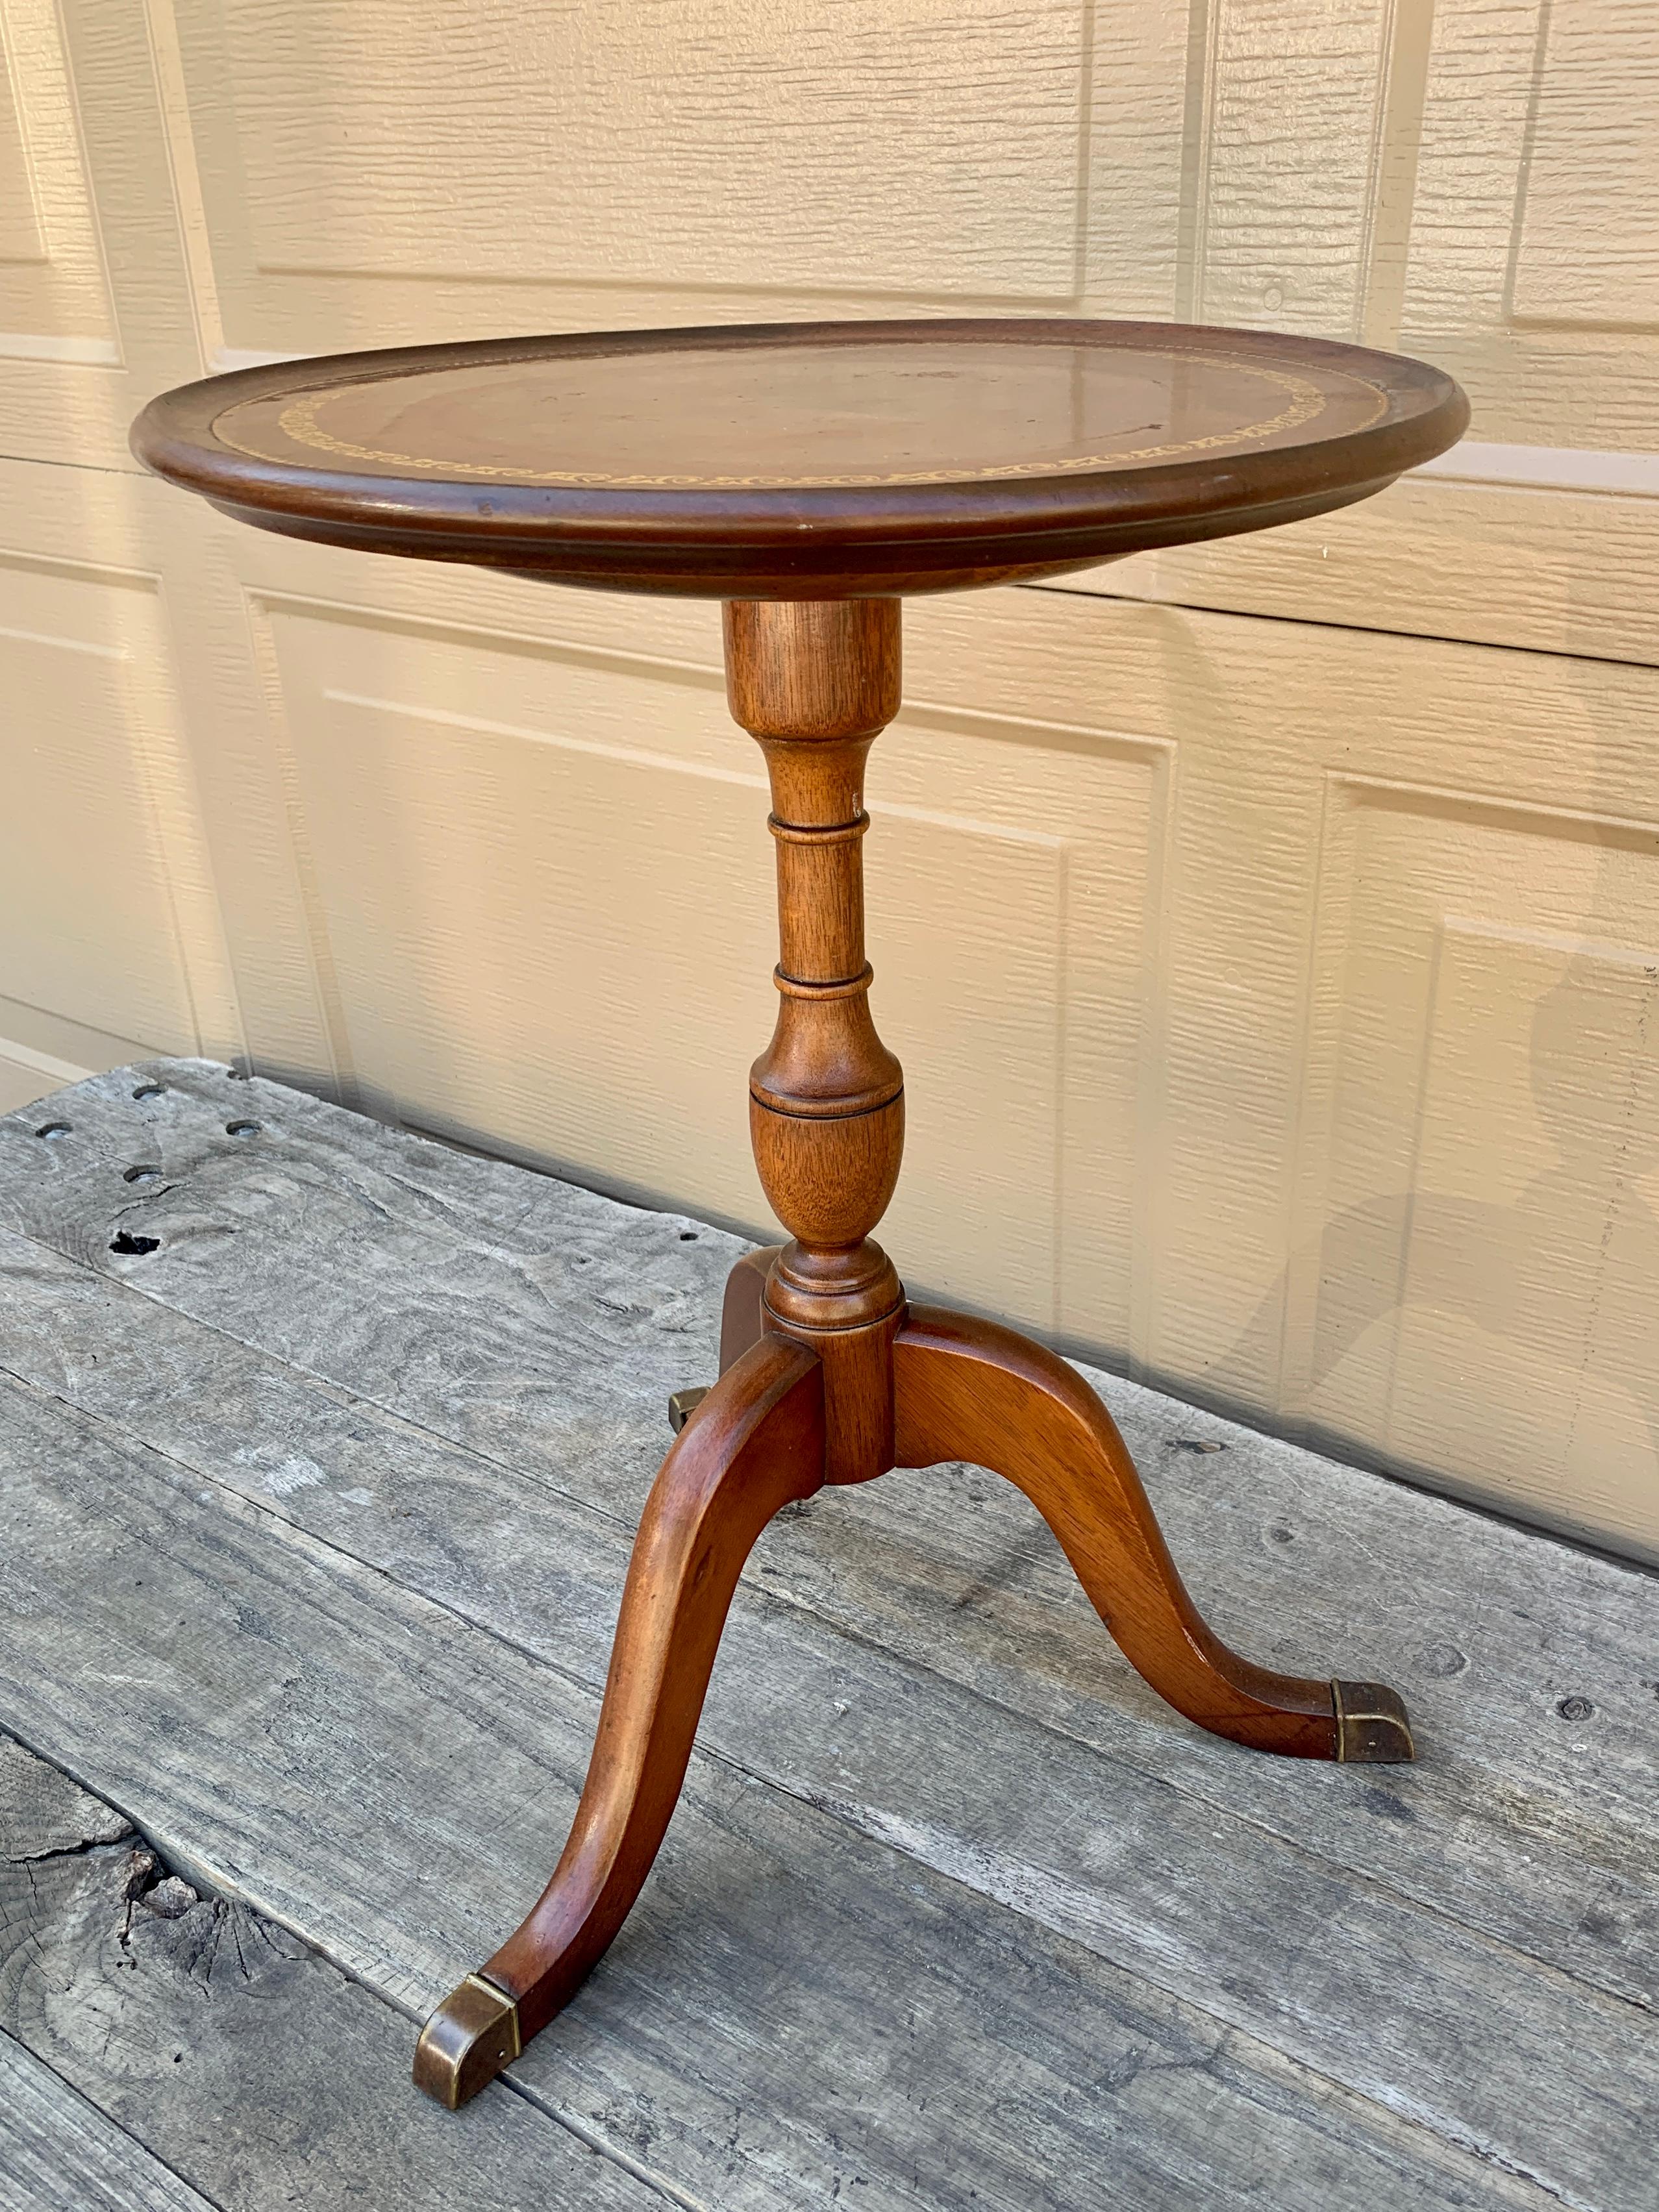 Vintage Georgian Embossed Leather Top Mahogany Round Side Table In Good Condition For Sale In Elkhart, IN